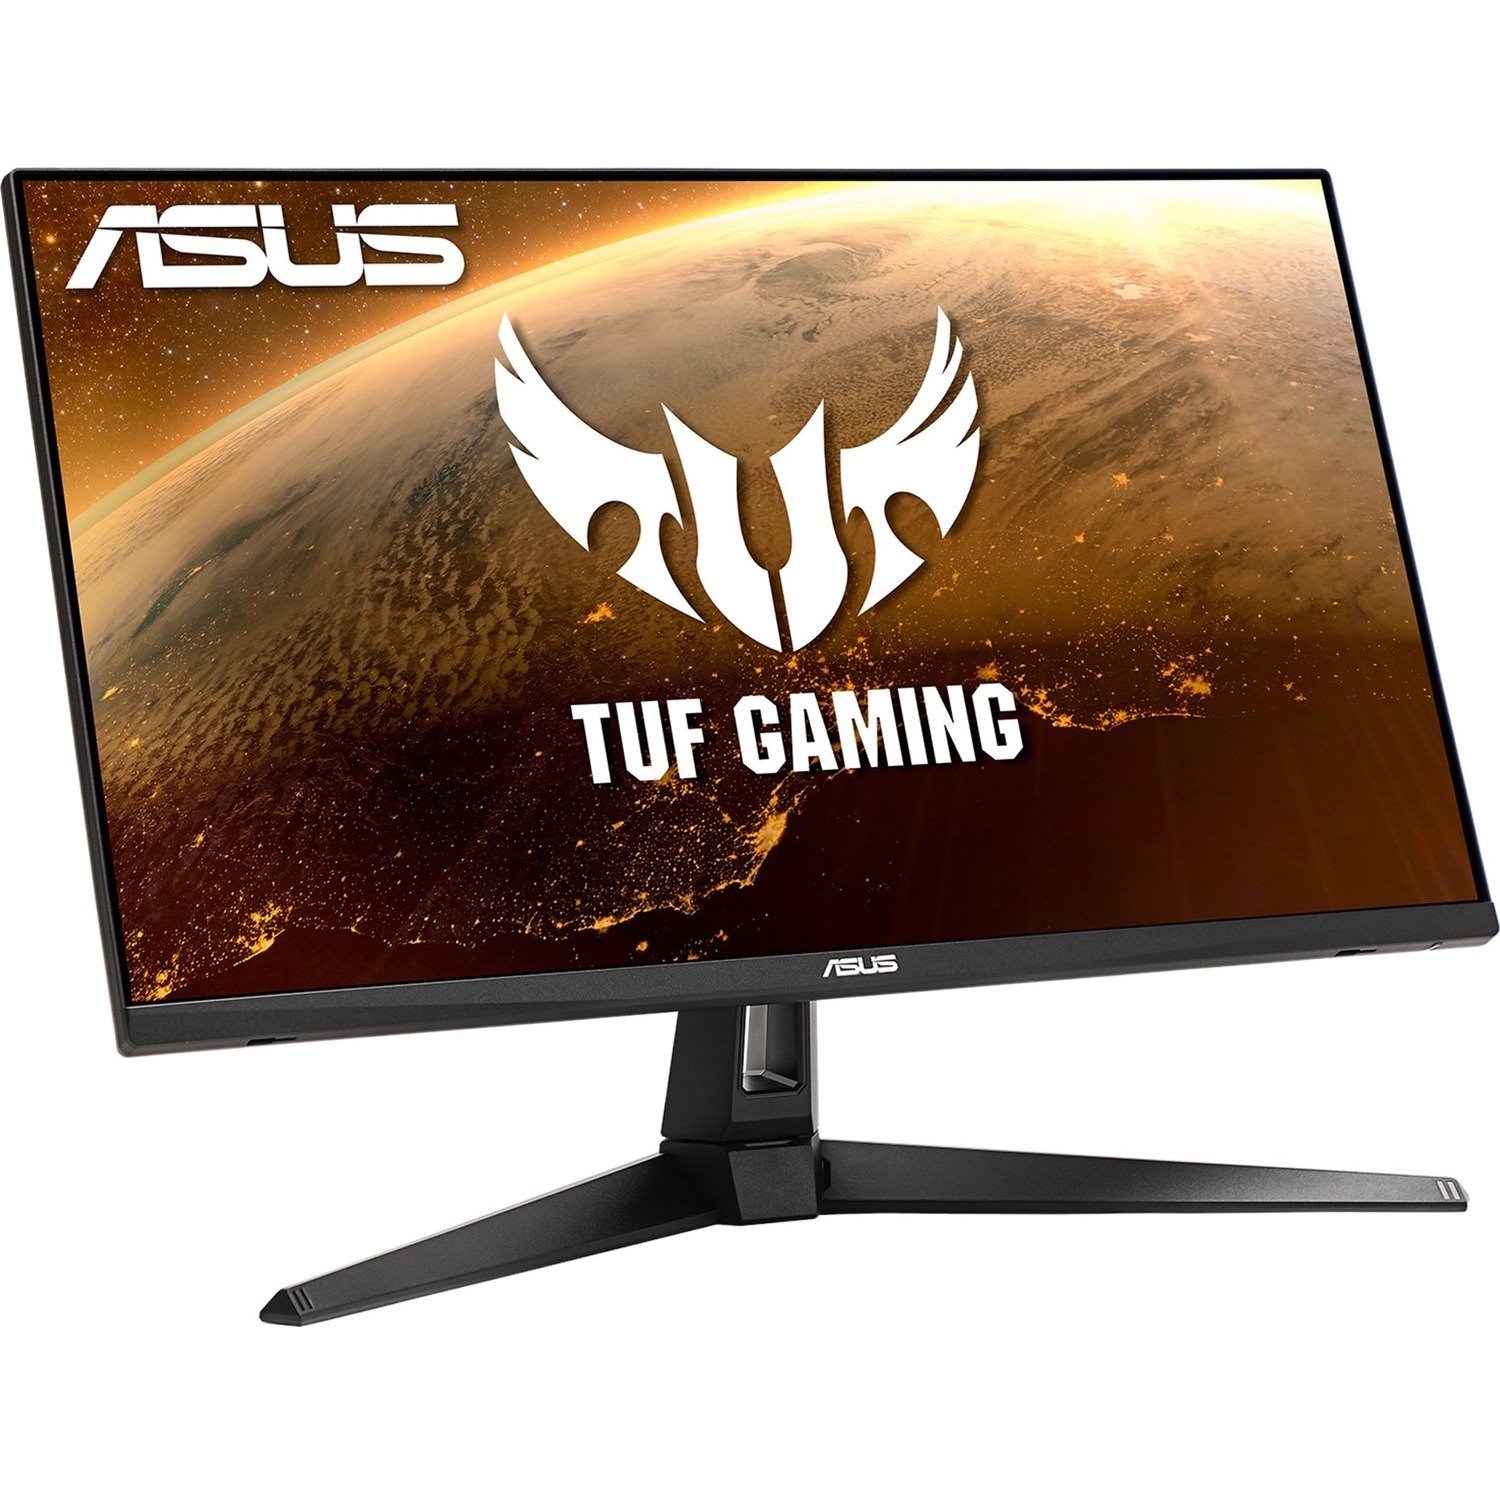 ASUS TUF Gaming 27" 1440P HDR Monitor (VG27AQ1A) - QHD (2560 x 1440), IPS, 170Hz (Supports 144Hz), 1ms, Extreme Low Motion Blur, Speaker, G-SYNC Compatible, VESA Mountable, DisplayPort, HDMI